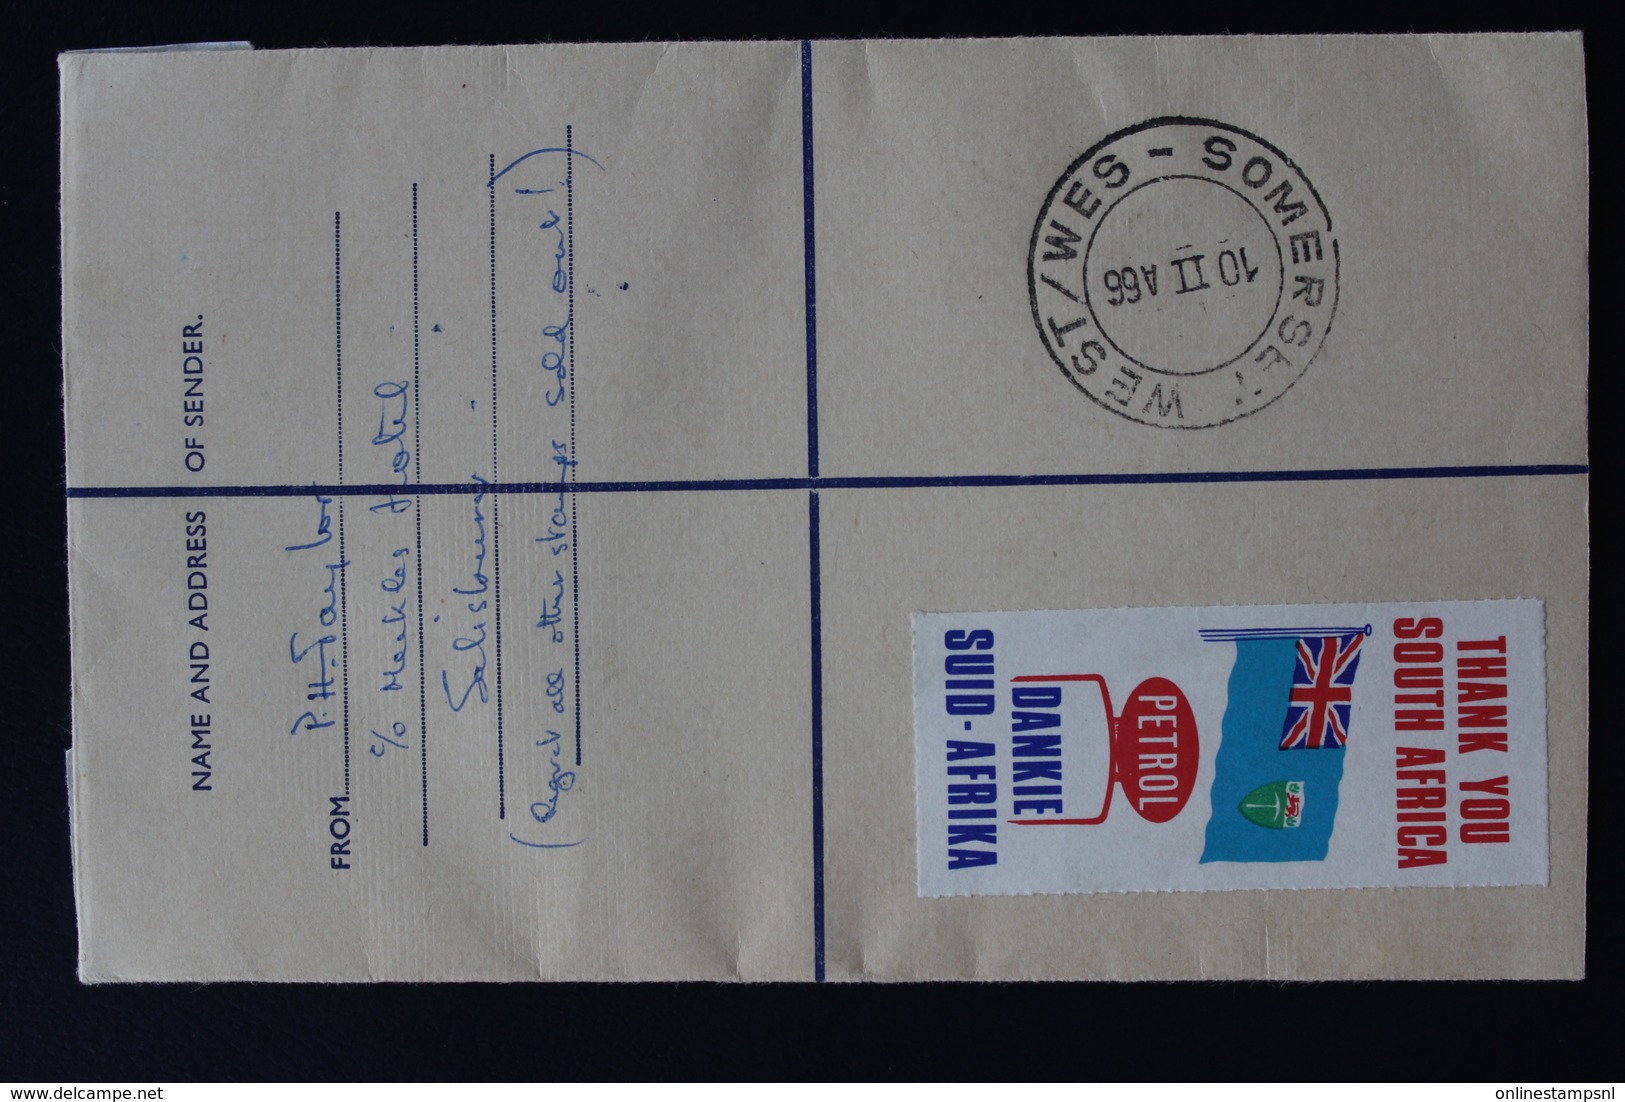 SOUTHERN  RHODESIA AIRMAIL REGISTERED COVER  SALISBURY -> CAPE TOWN 1966  SG 359,360,363,365-367, 369 PROPAGANDA LABEL - Southern Rhodesia (...-1964)